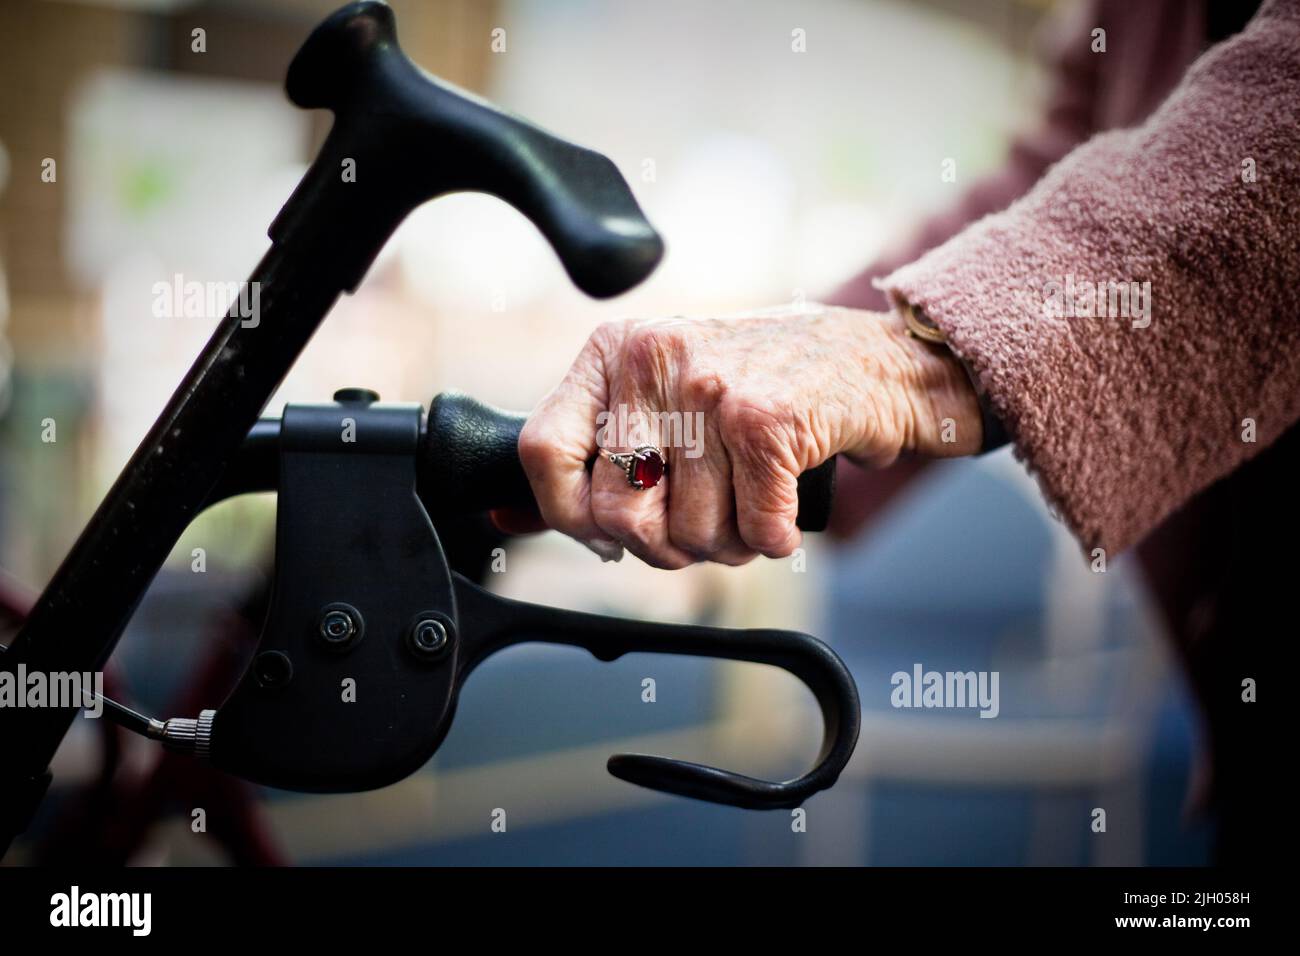 CLOSE-UP OF AN ELDERLY WOMAN'S HAND HOLDING ON TO A MOBILITY DEVICE. Stock Photo